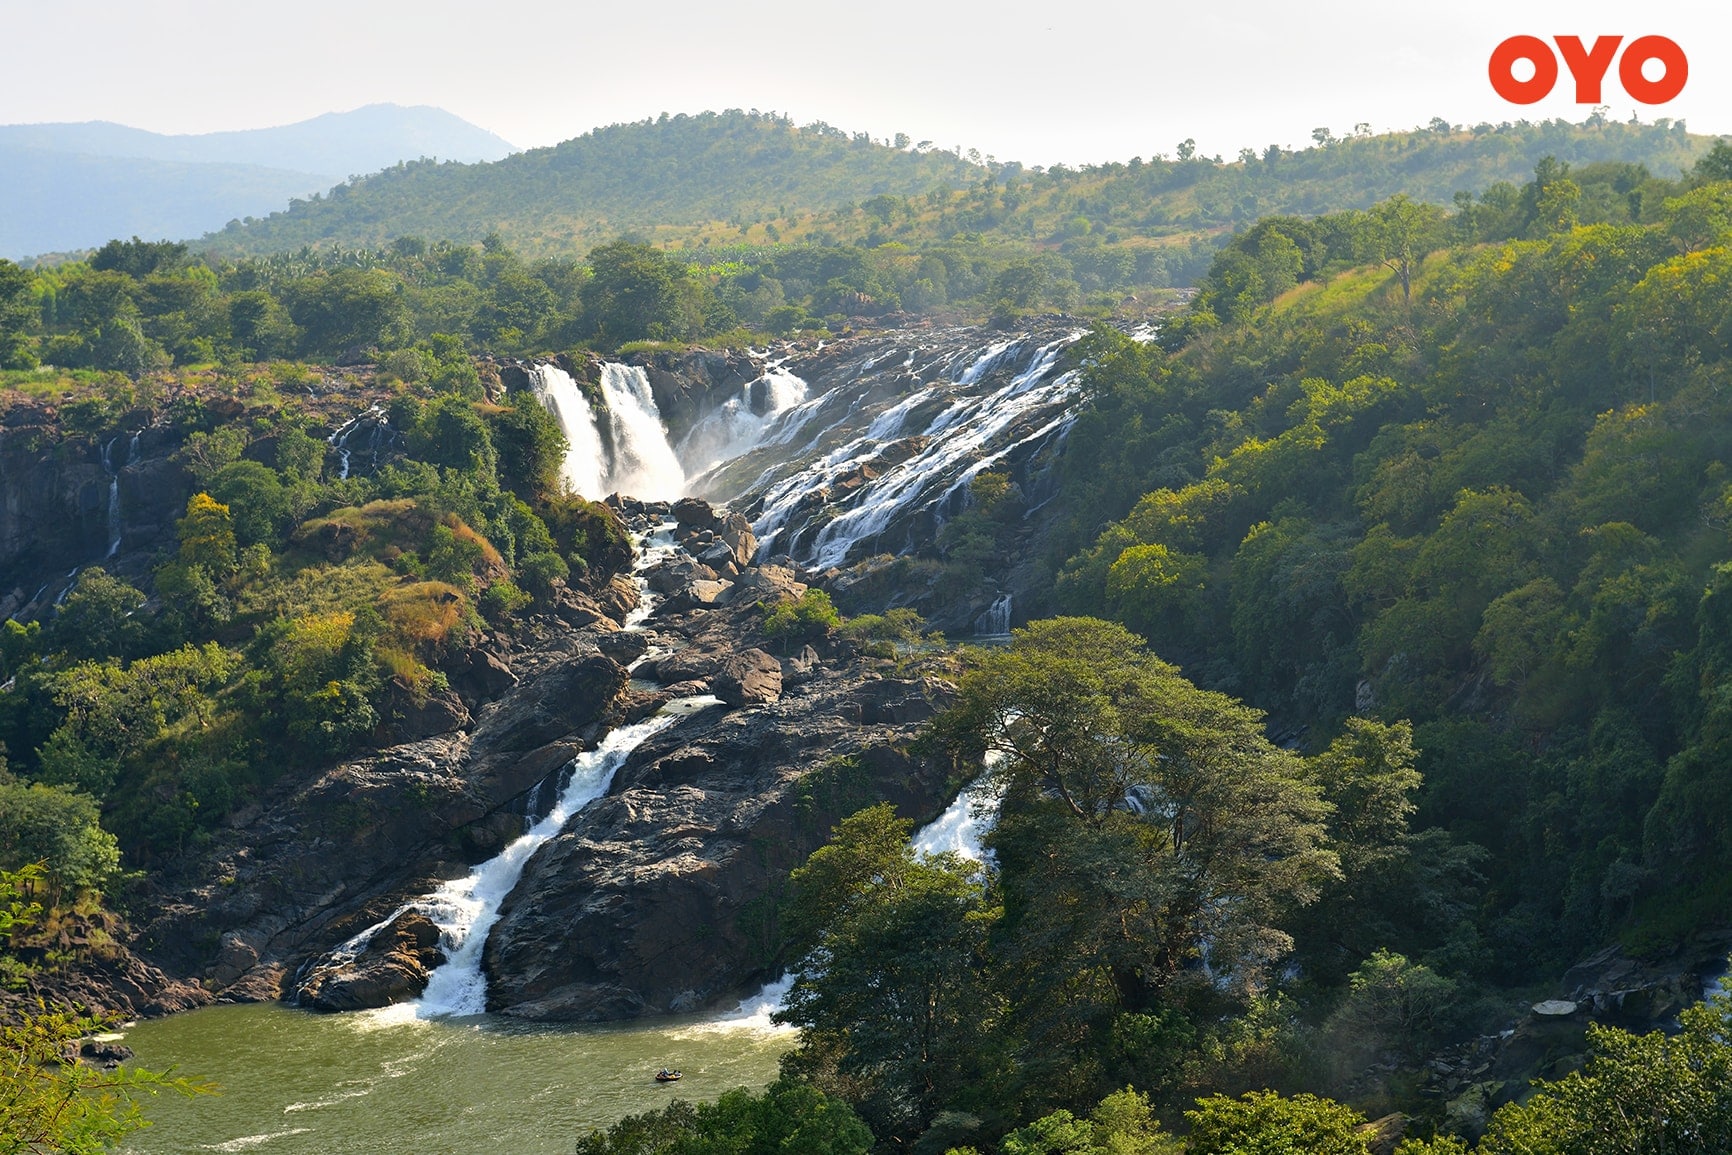 Shivanasamudra- One of the Best tourist places near Bangalore within 300 kms